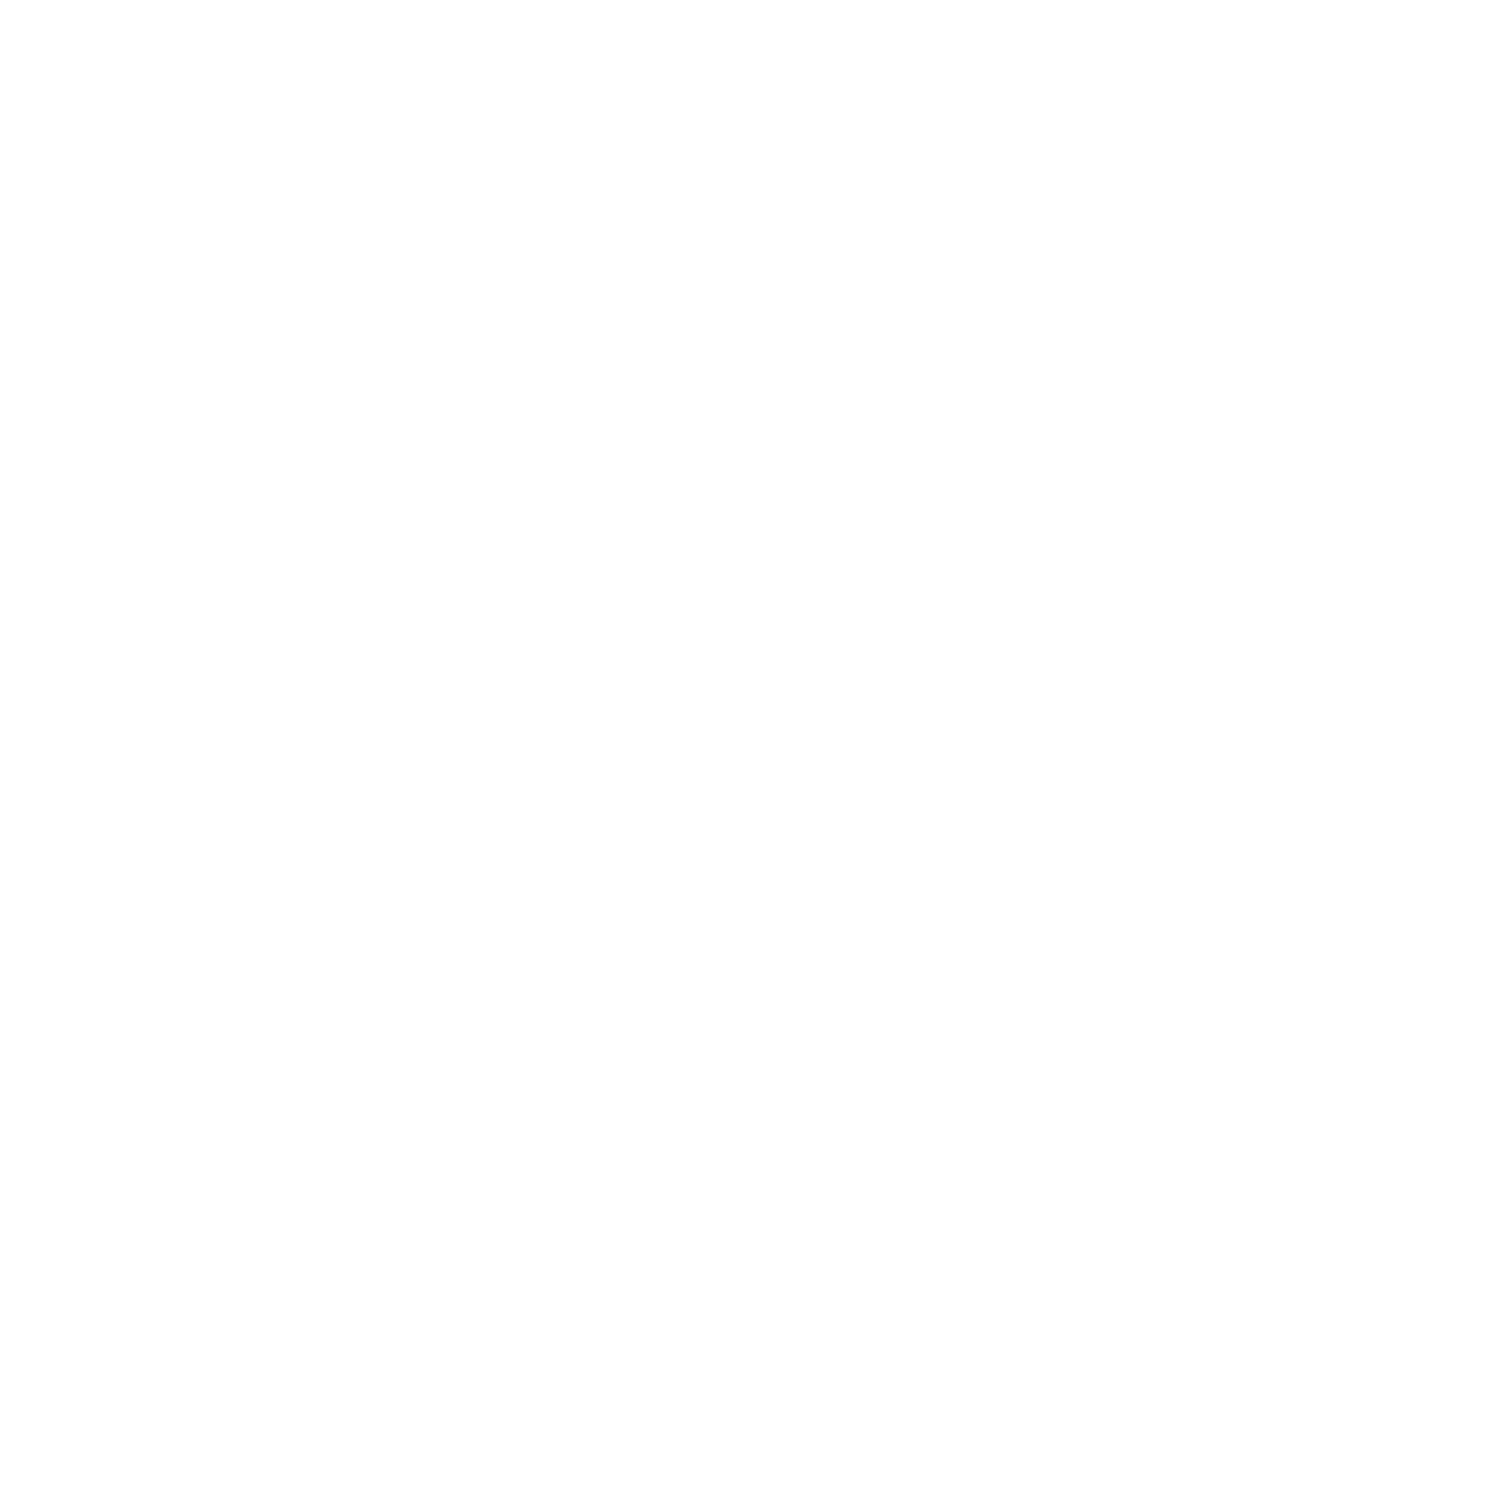 UK Traditional Witchcraft | UK British Folk Magic | Intuitive Witch - UK traditional witch & folk magic blog & writer. Traditional witchcraft, UK intuitive witchcraft, homesteading, foraging & natural healing. Lancashire Witch. Lancashire Witches. Lancashire Witch Trials. Pendle Hill